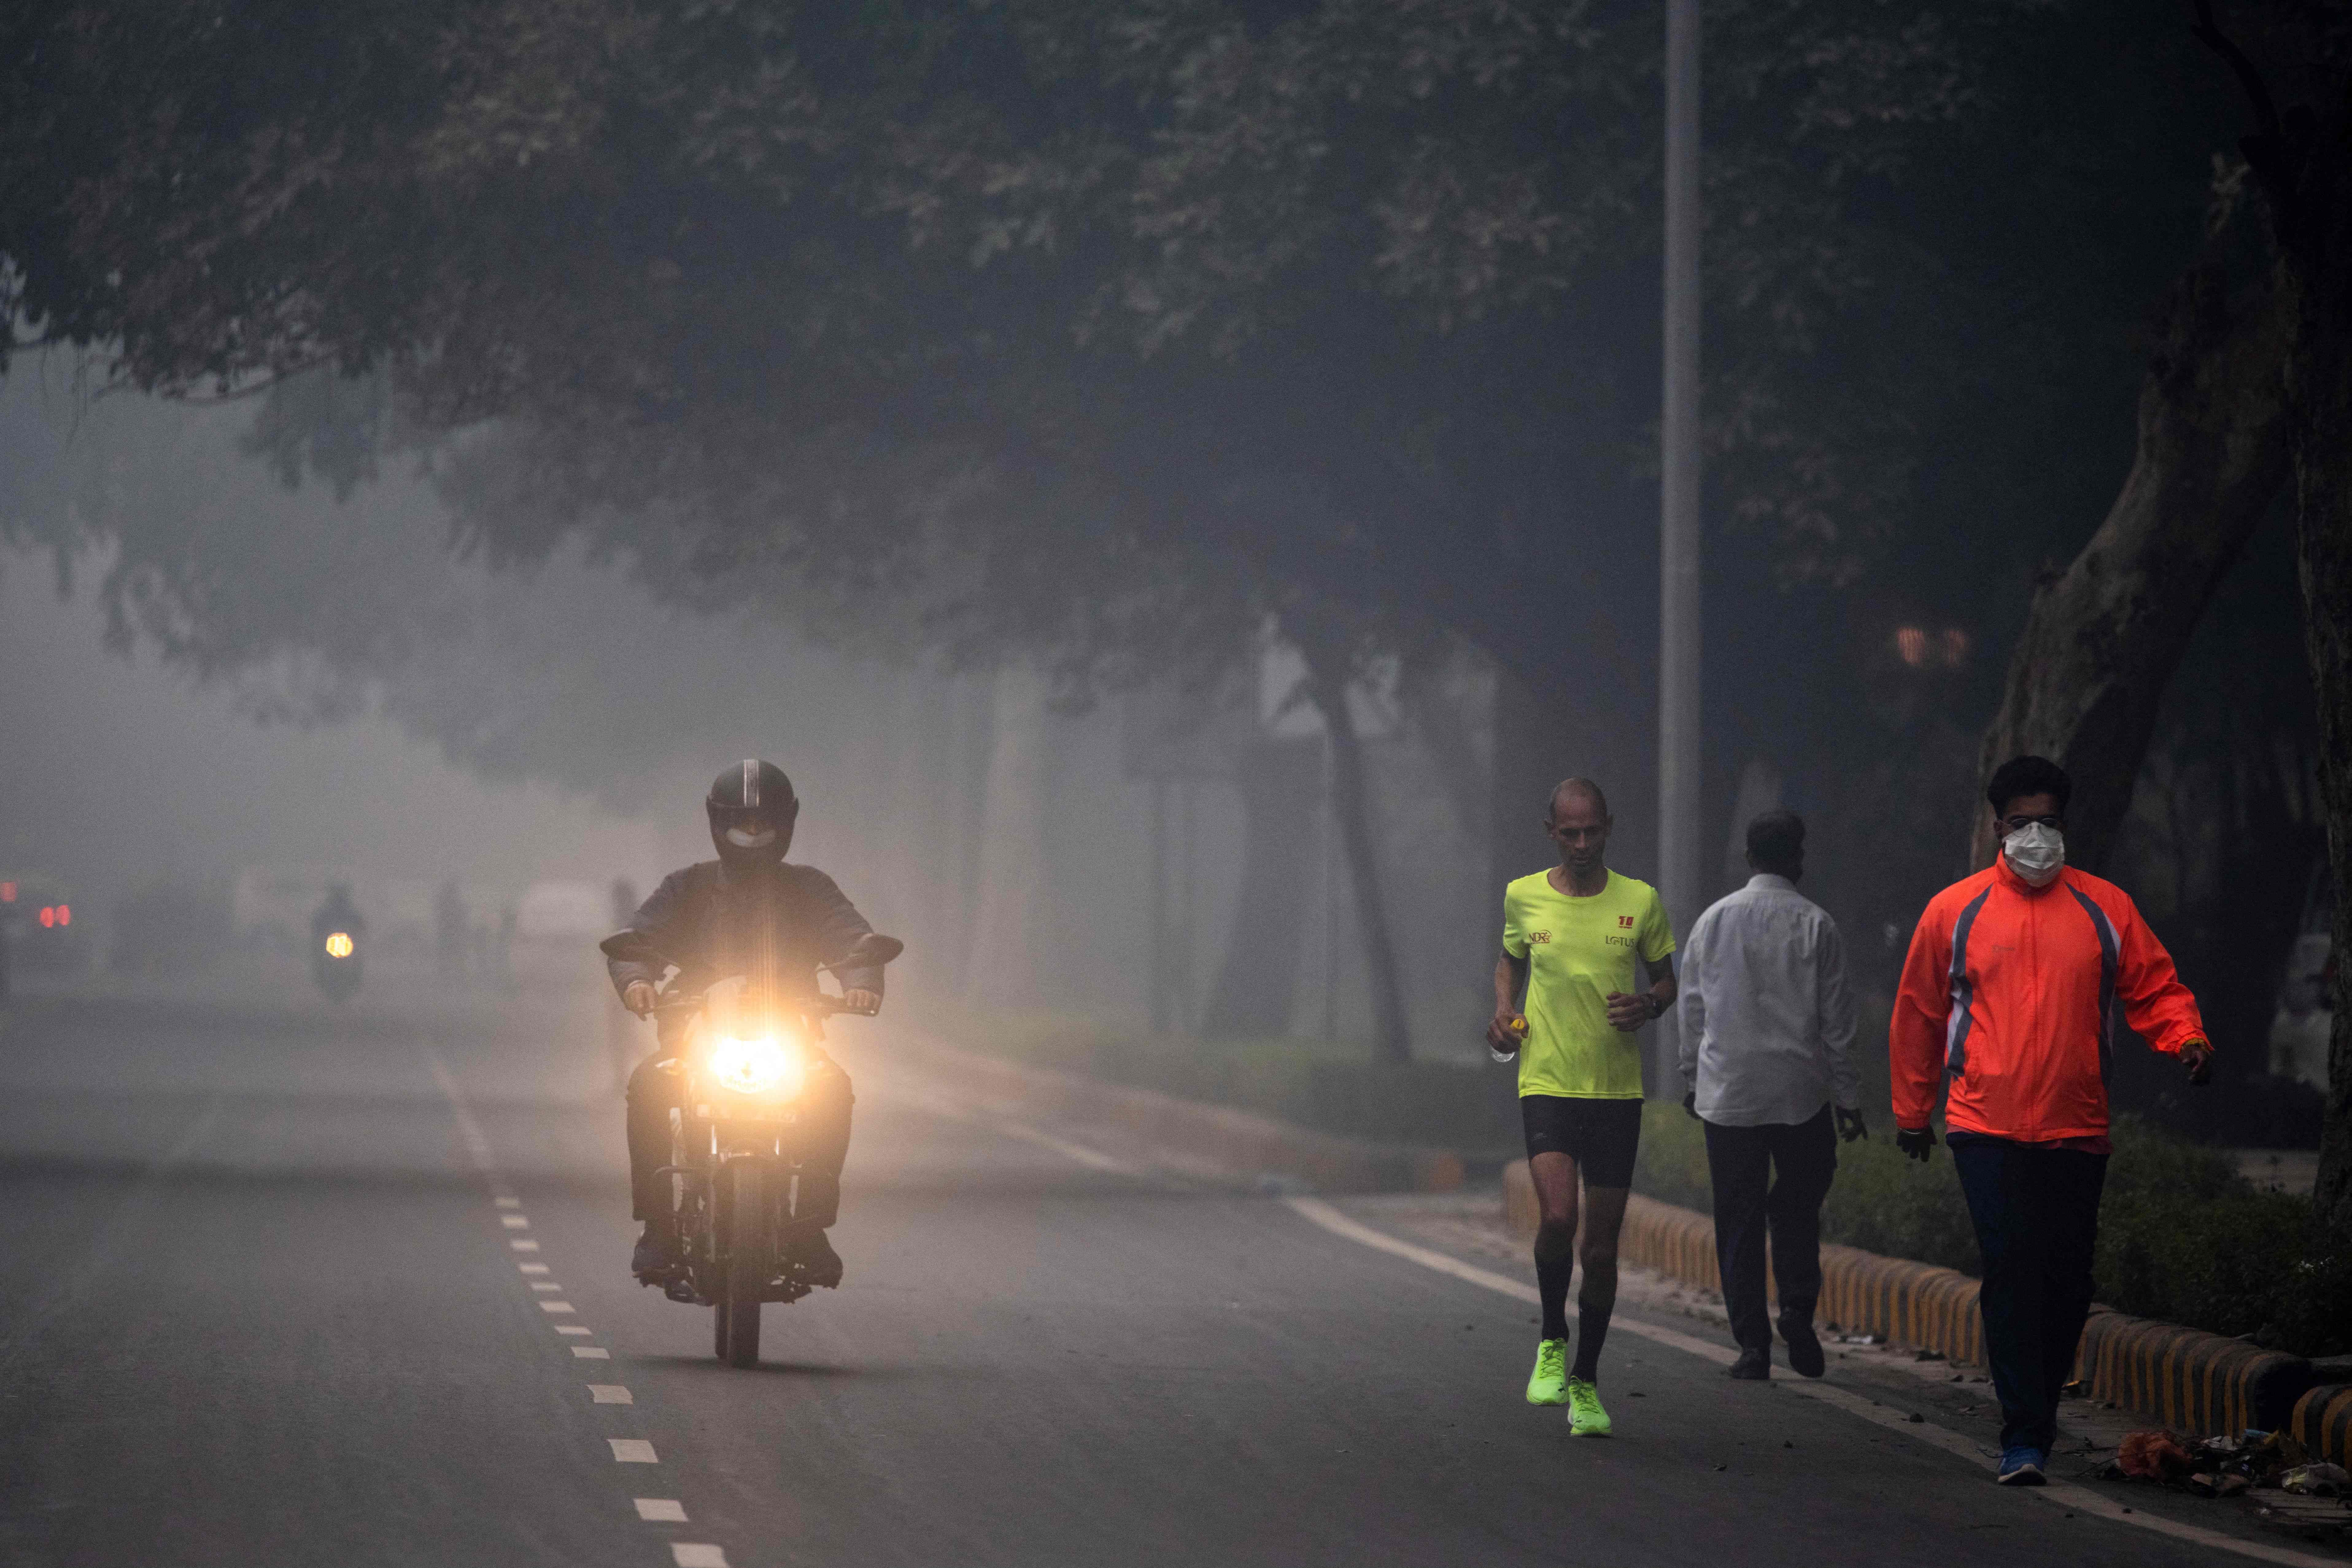 A man runs along a street amid smoggy conditions in New Delhi